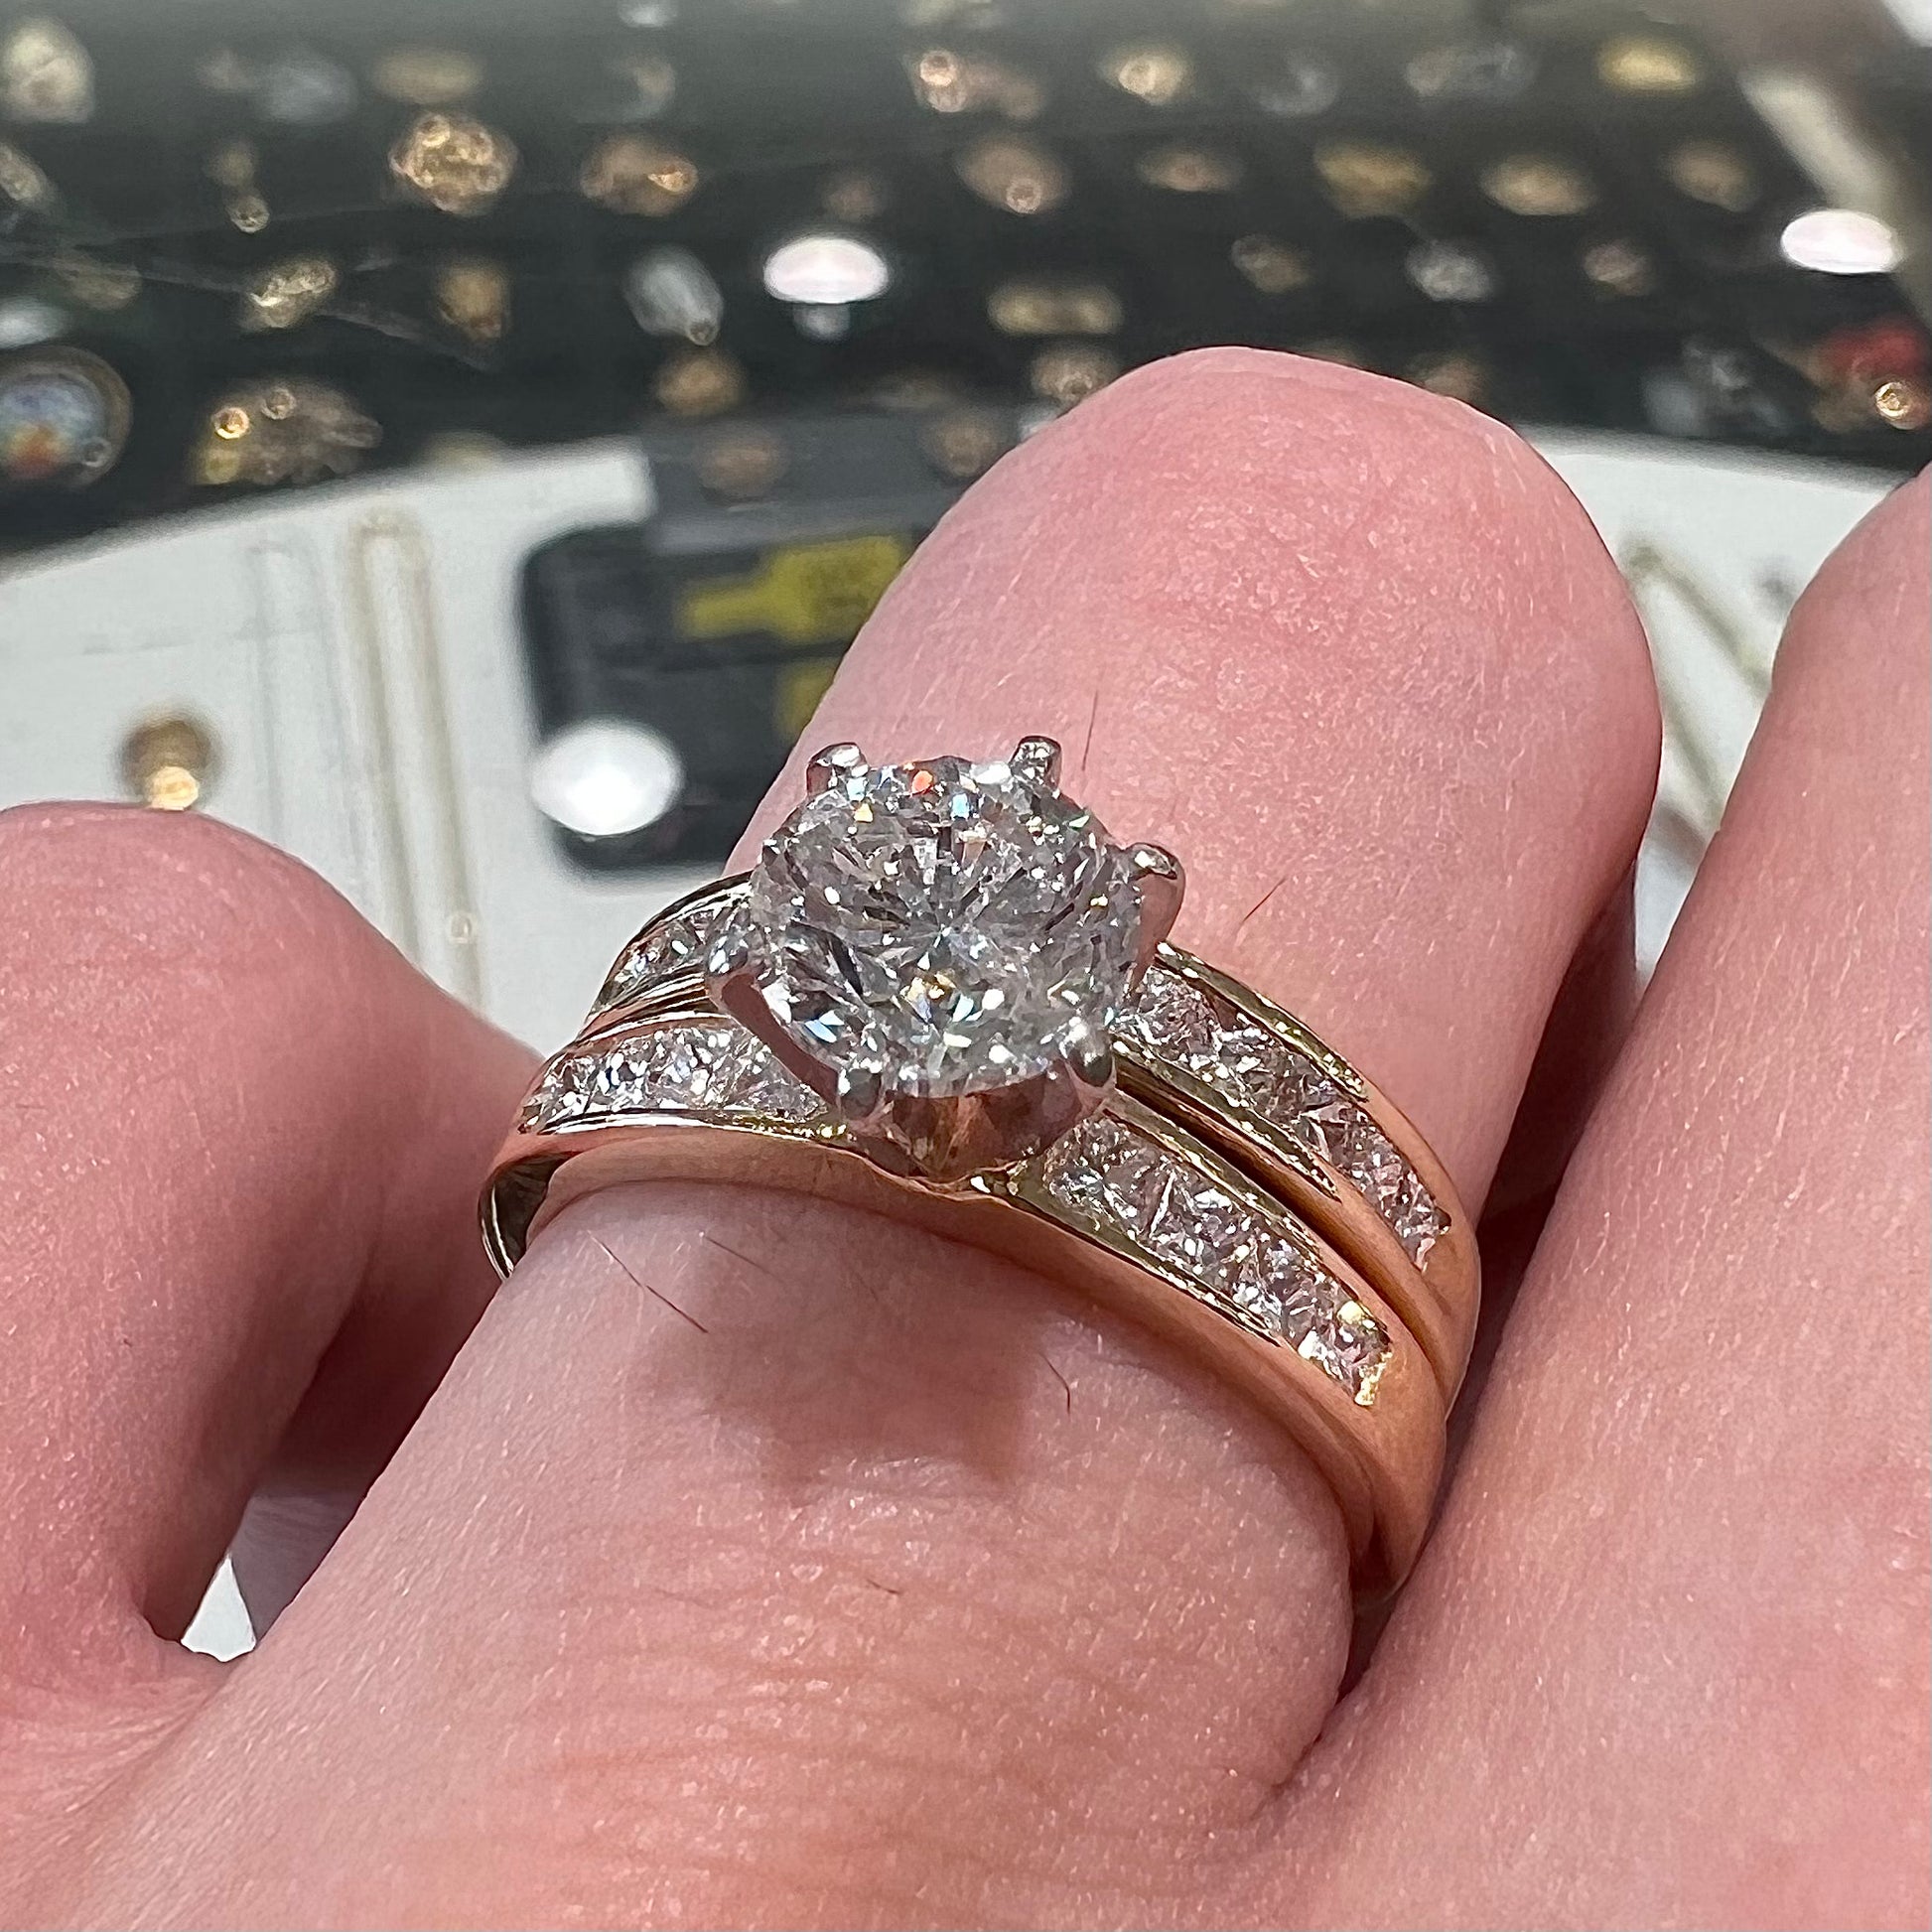 A diamond engagement and wedding ring set.  The center stone is a 1 carat round diamond, and the side stones are channel set princess cut diamonds.